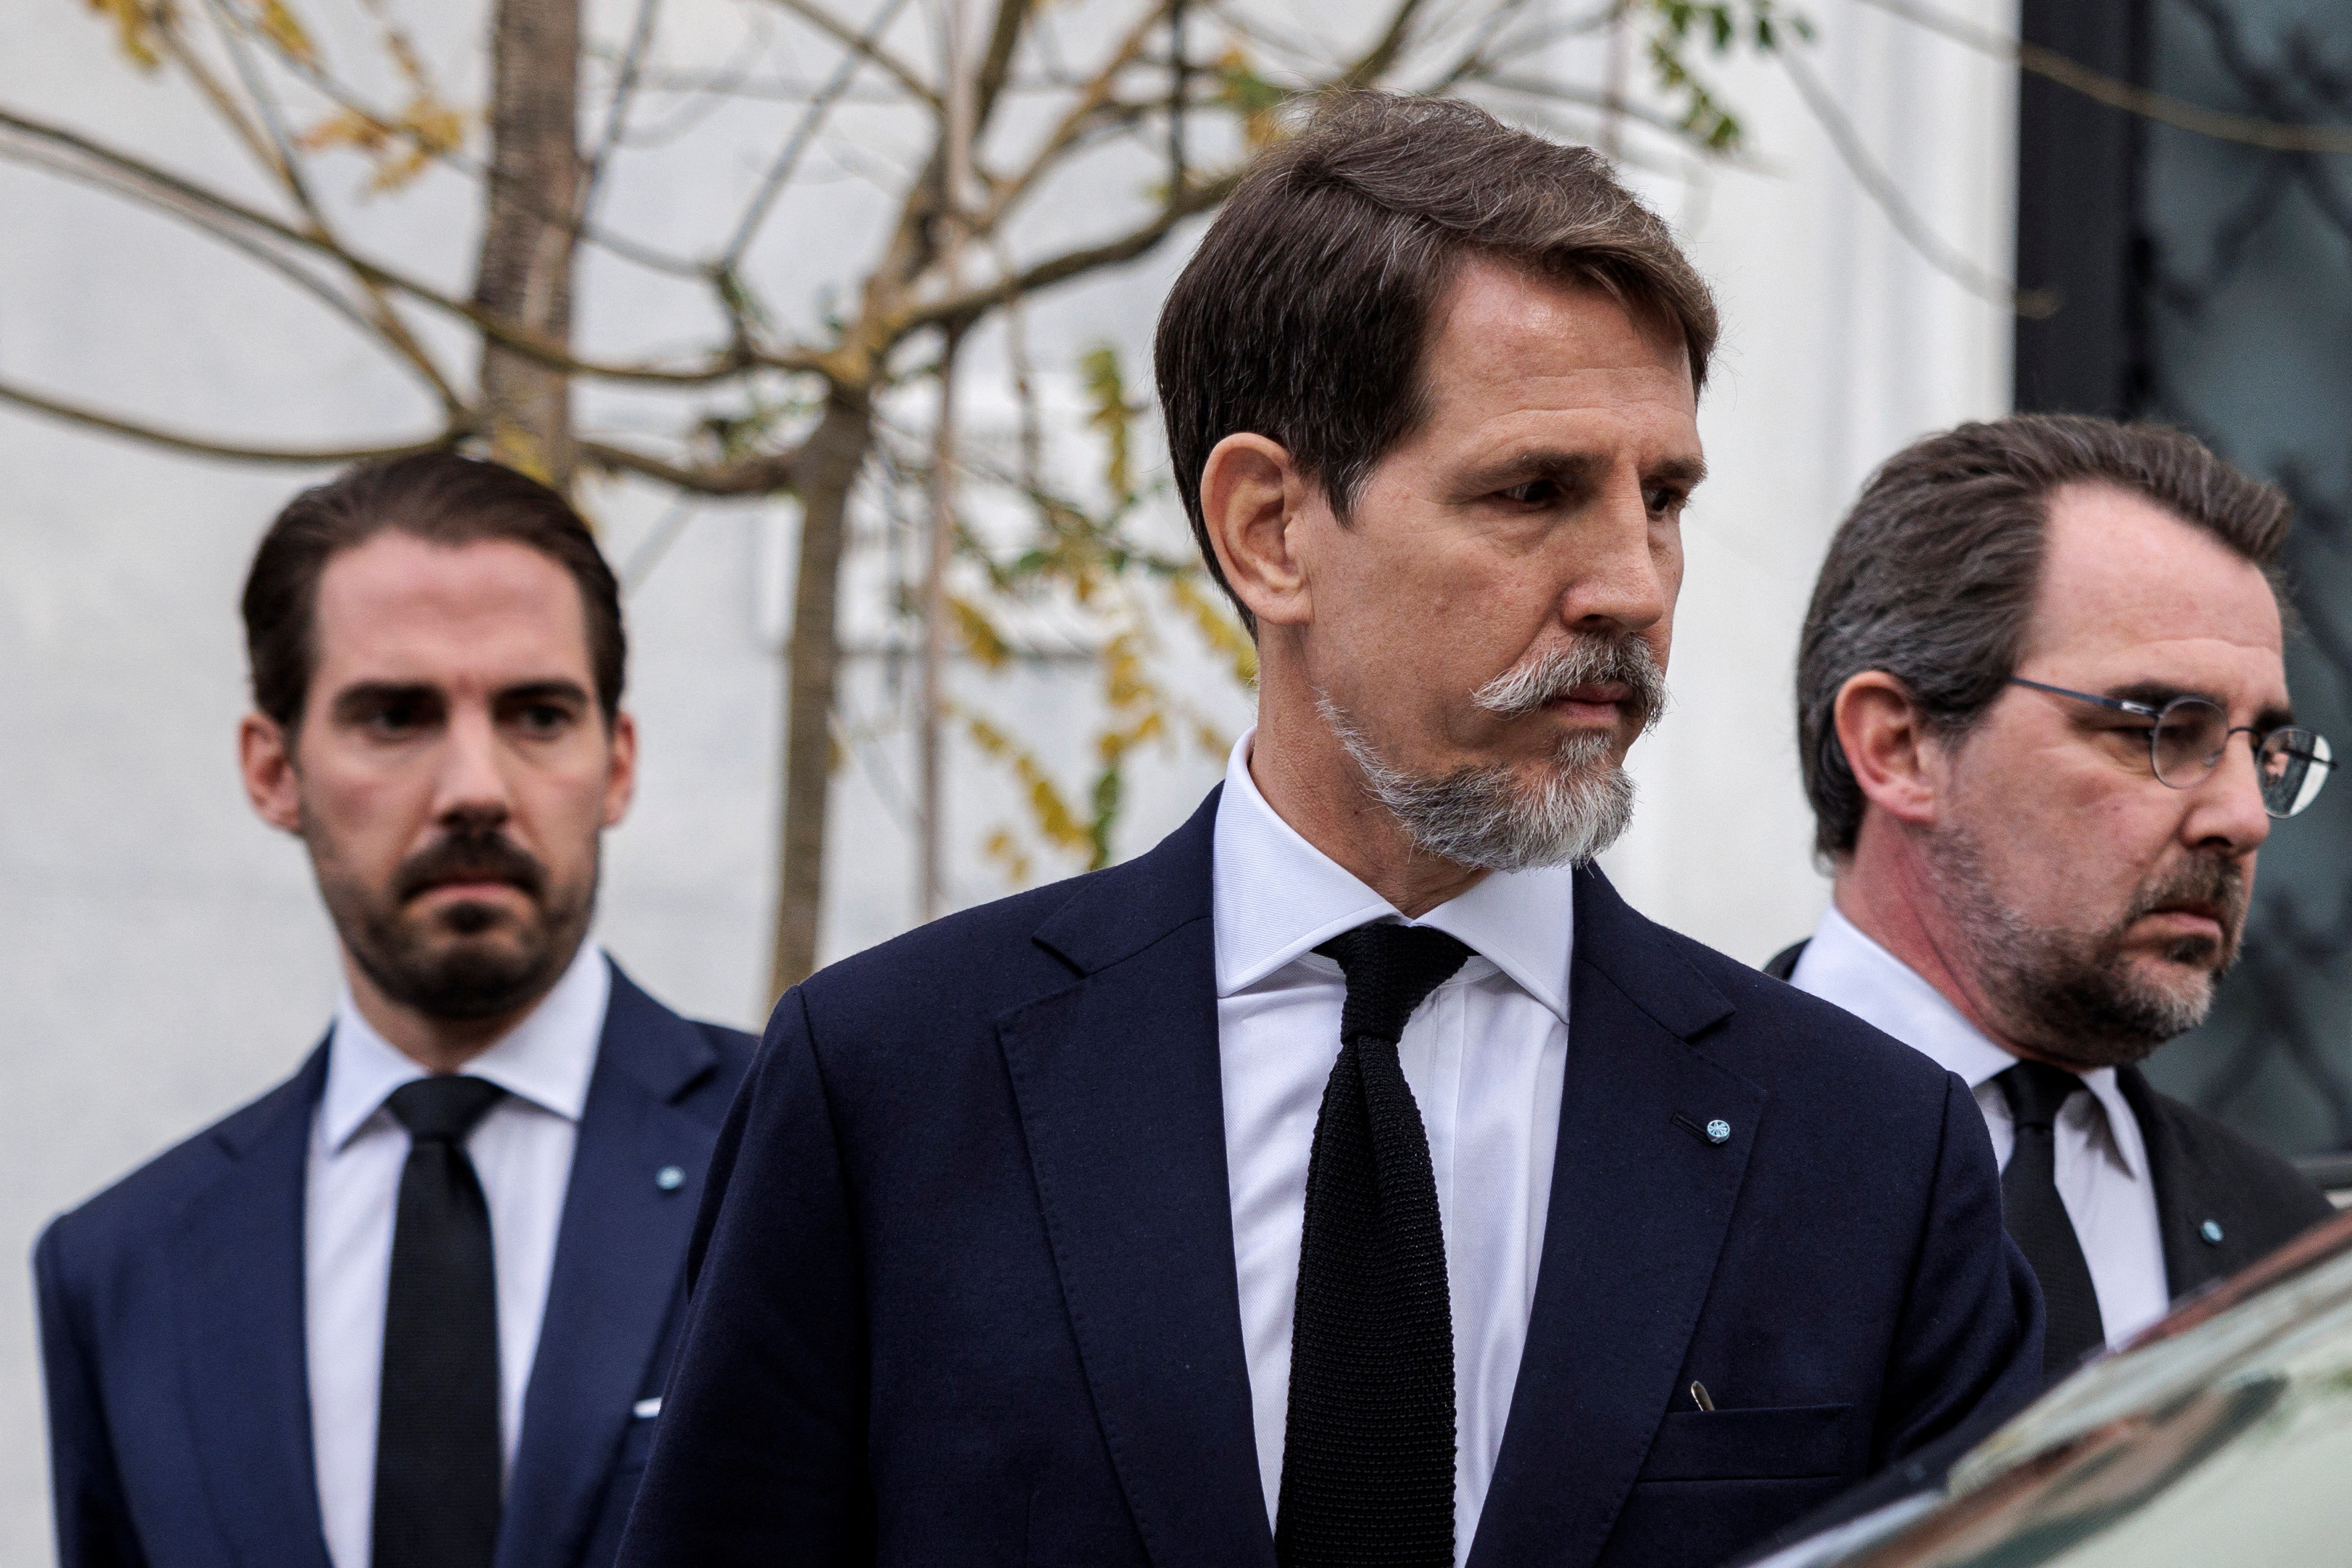 The sons of former King Constantine II of Greece, Crown Prince Pavlos, Prince Nikolaos and Prince Philippos leave the Maximos Mansion following a meeting with members of the Greek government.  REUTERS/Alkis Konstantinidis